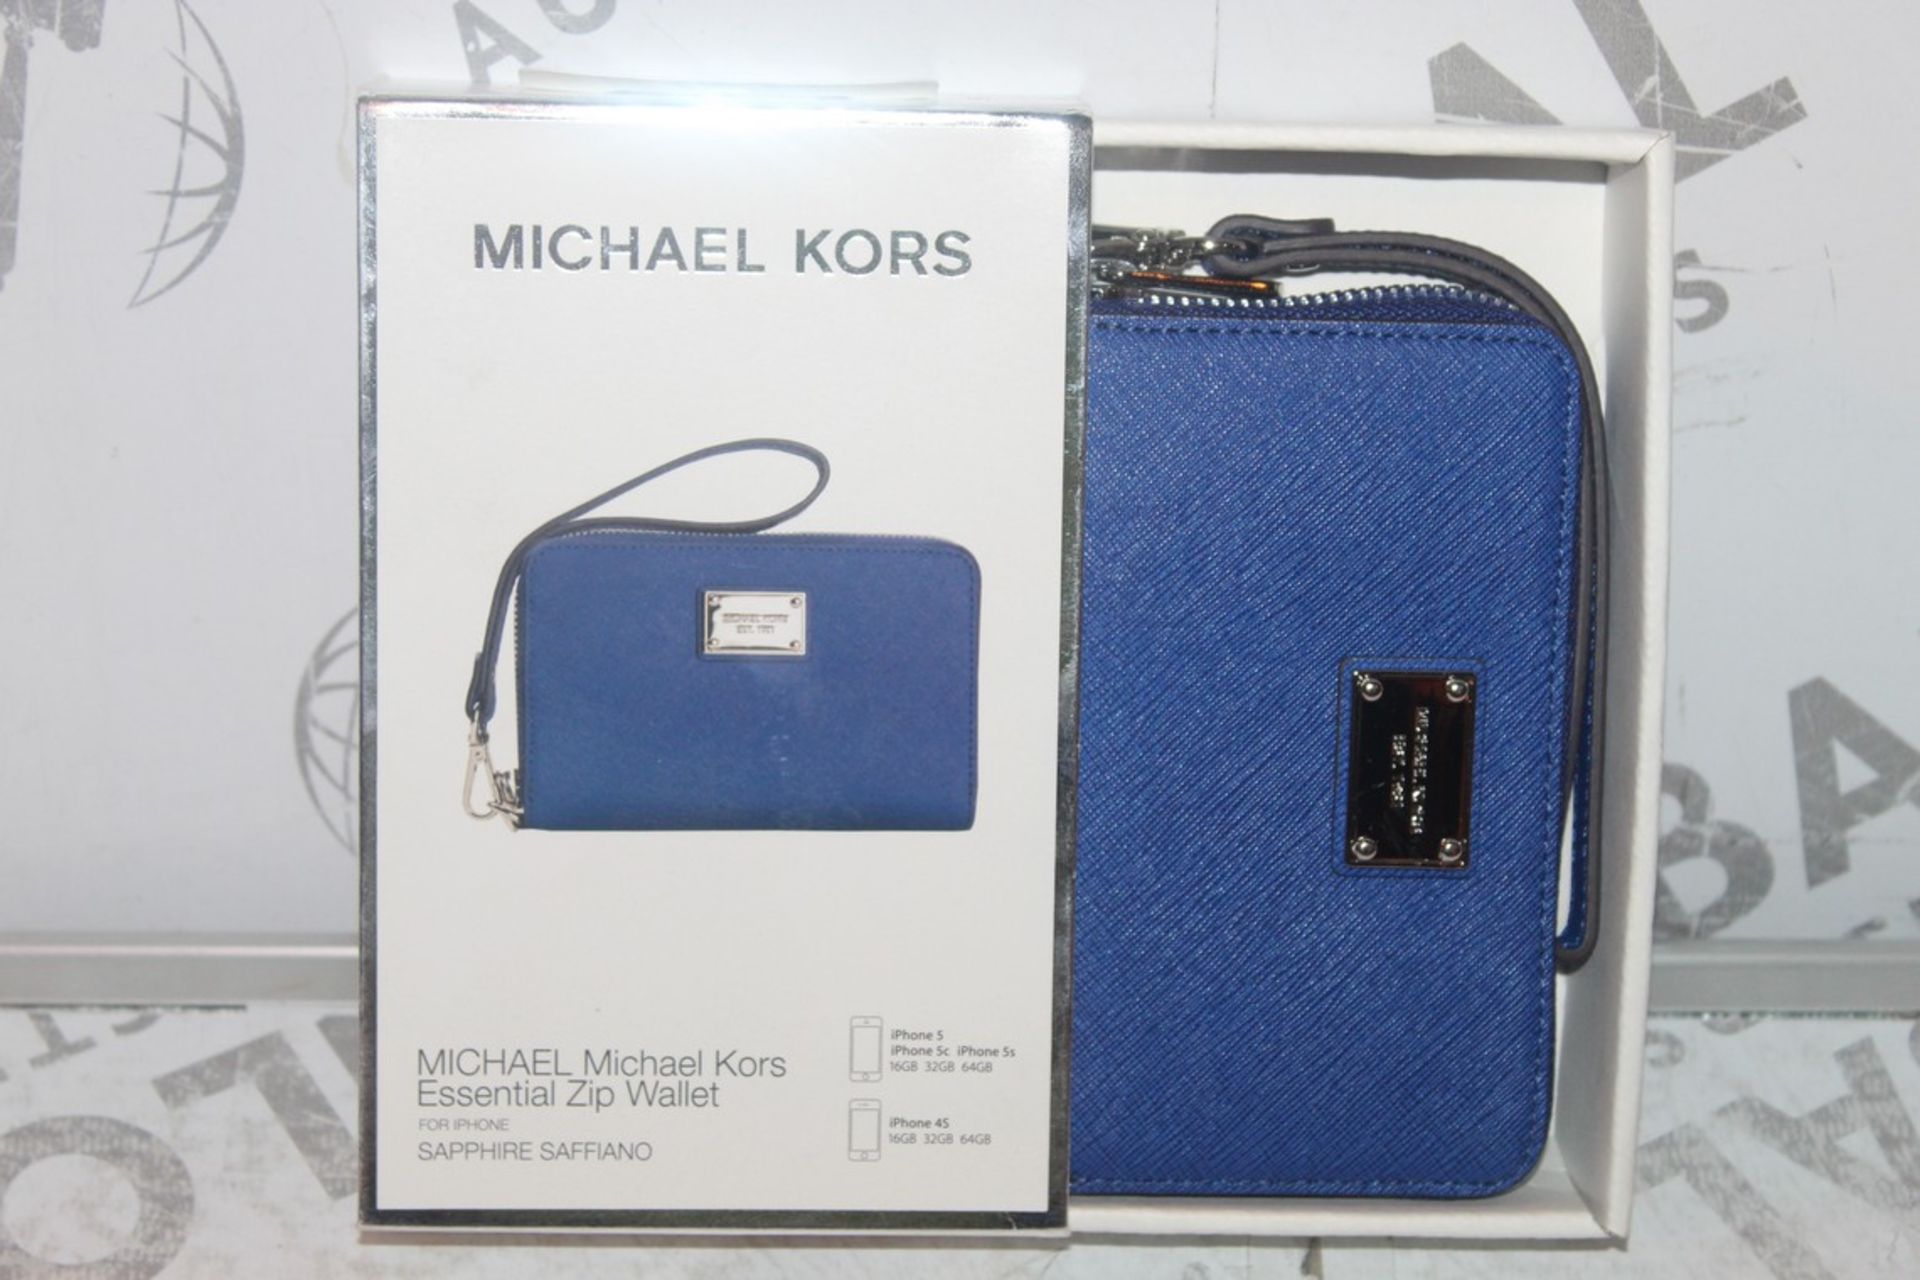 Lot to Contain 2 Michael Kors Essential Zip Wallets with Phone Compartment Combined RRP £60